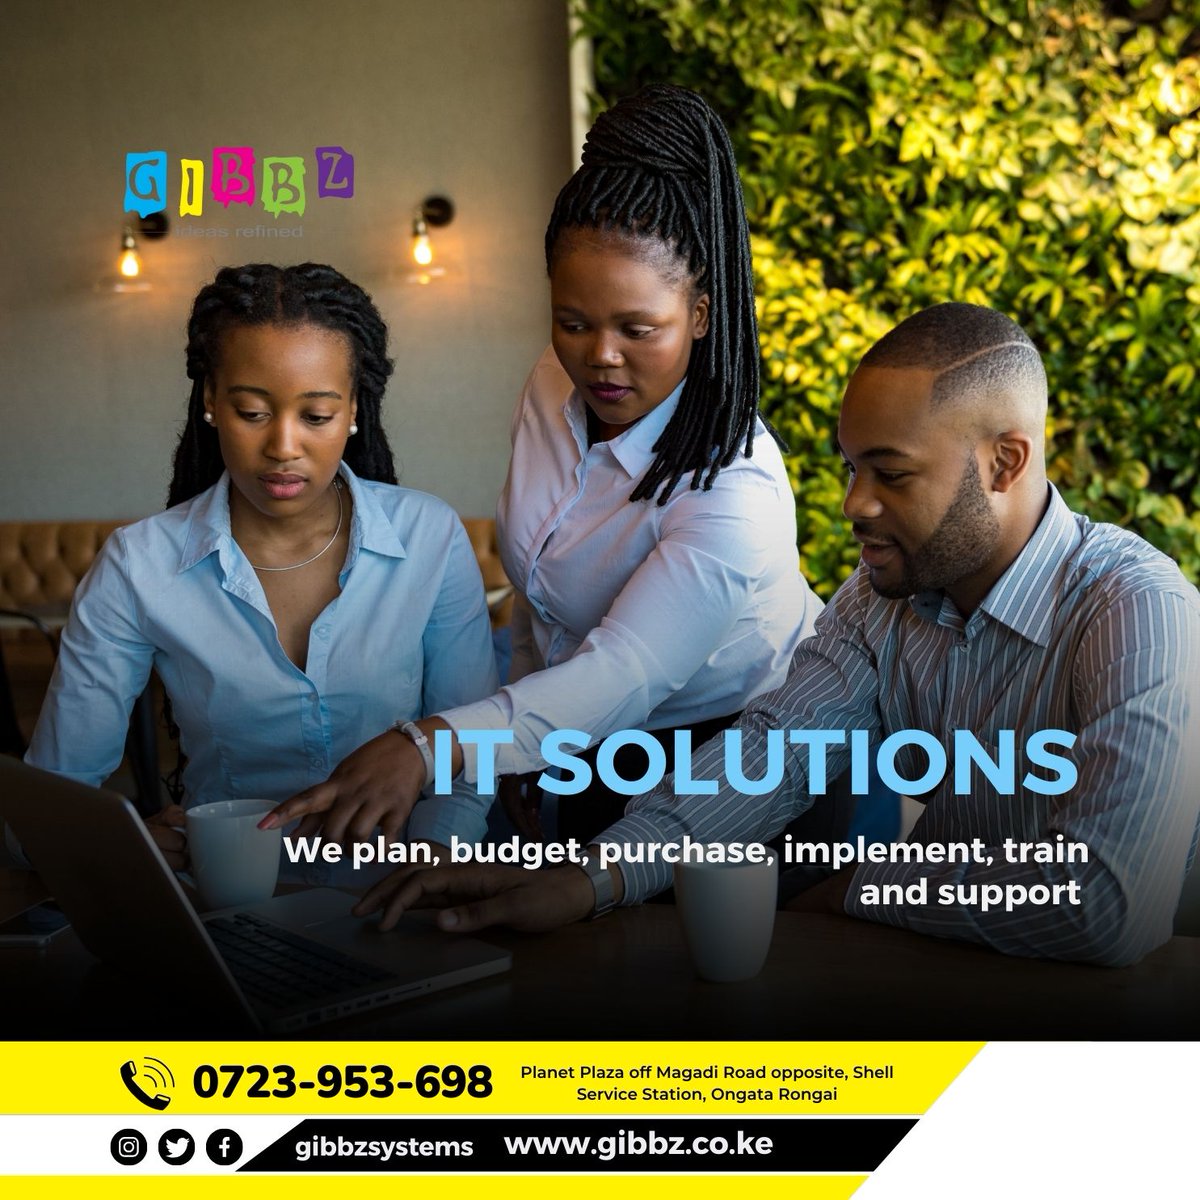 Our #ITprofessionals and consultants can perform expert research on the newest technologies, ensuring that you’re only spending your budget on what you need to #growyourbusiness.

Learn more Contact us at 0723953698!
#cloudsecurity#gibbzke #gibbzsystems